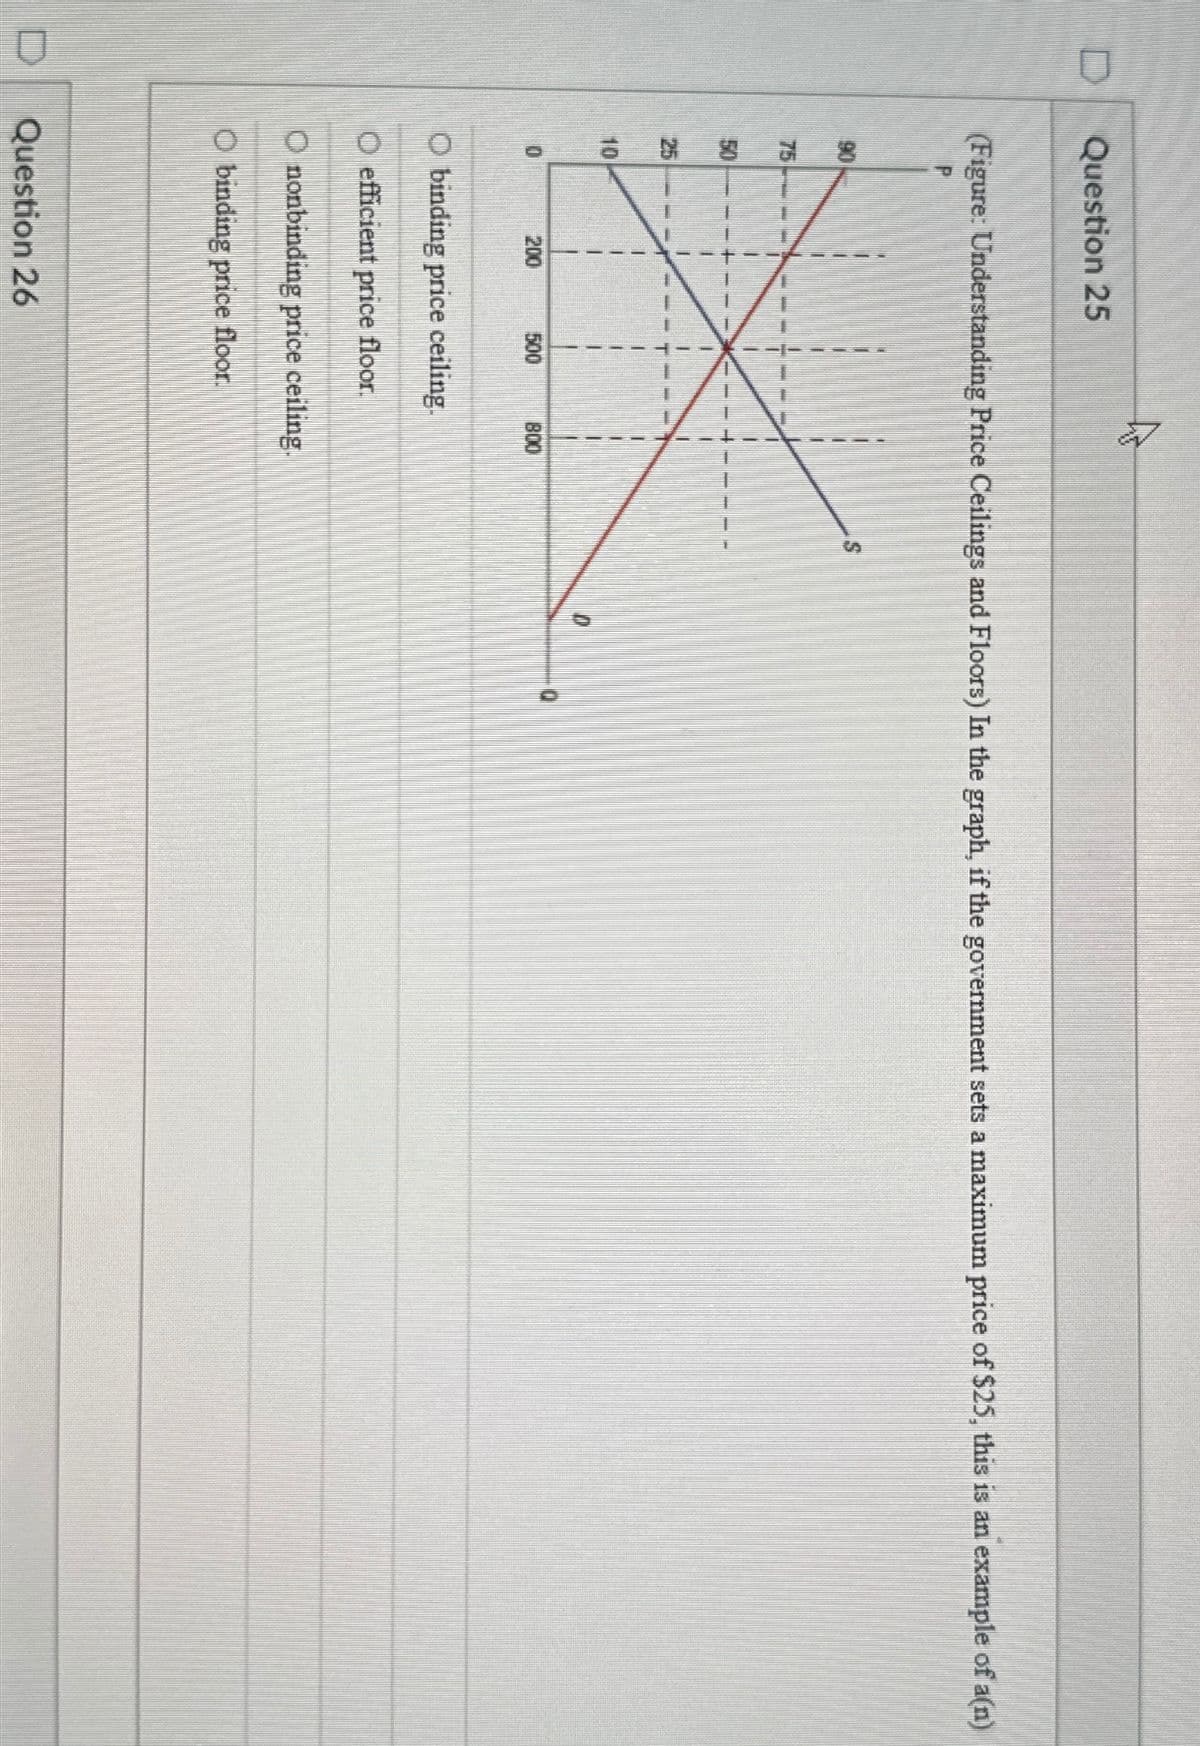 Question 25
(Figure: Understanding Price Ceilings and Floors) In the graph, if the government sets a maximum price of $25, this is an example of a(n)
P
90
75
50
25
200
500
Question 26
800
O binding price ceiling.
efficient price floor.
Ononbinding price ceiling.
O binding price floor.
1
E
D
0